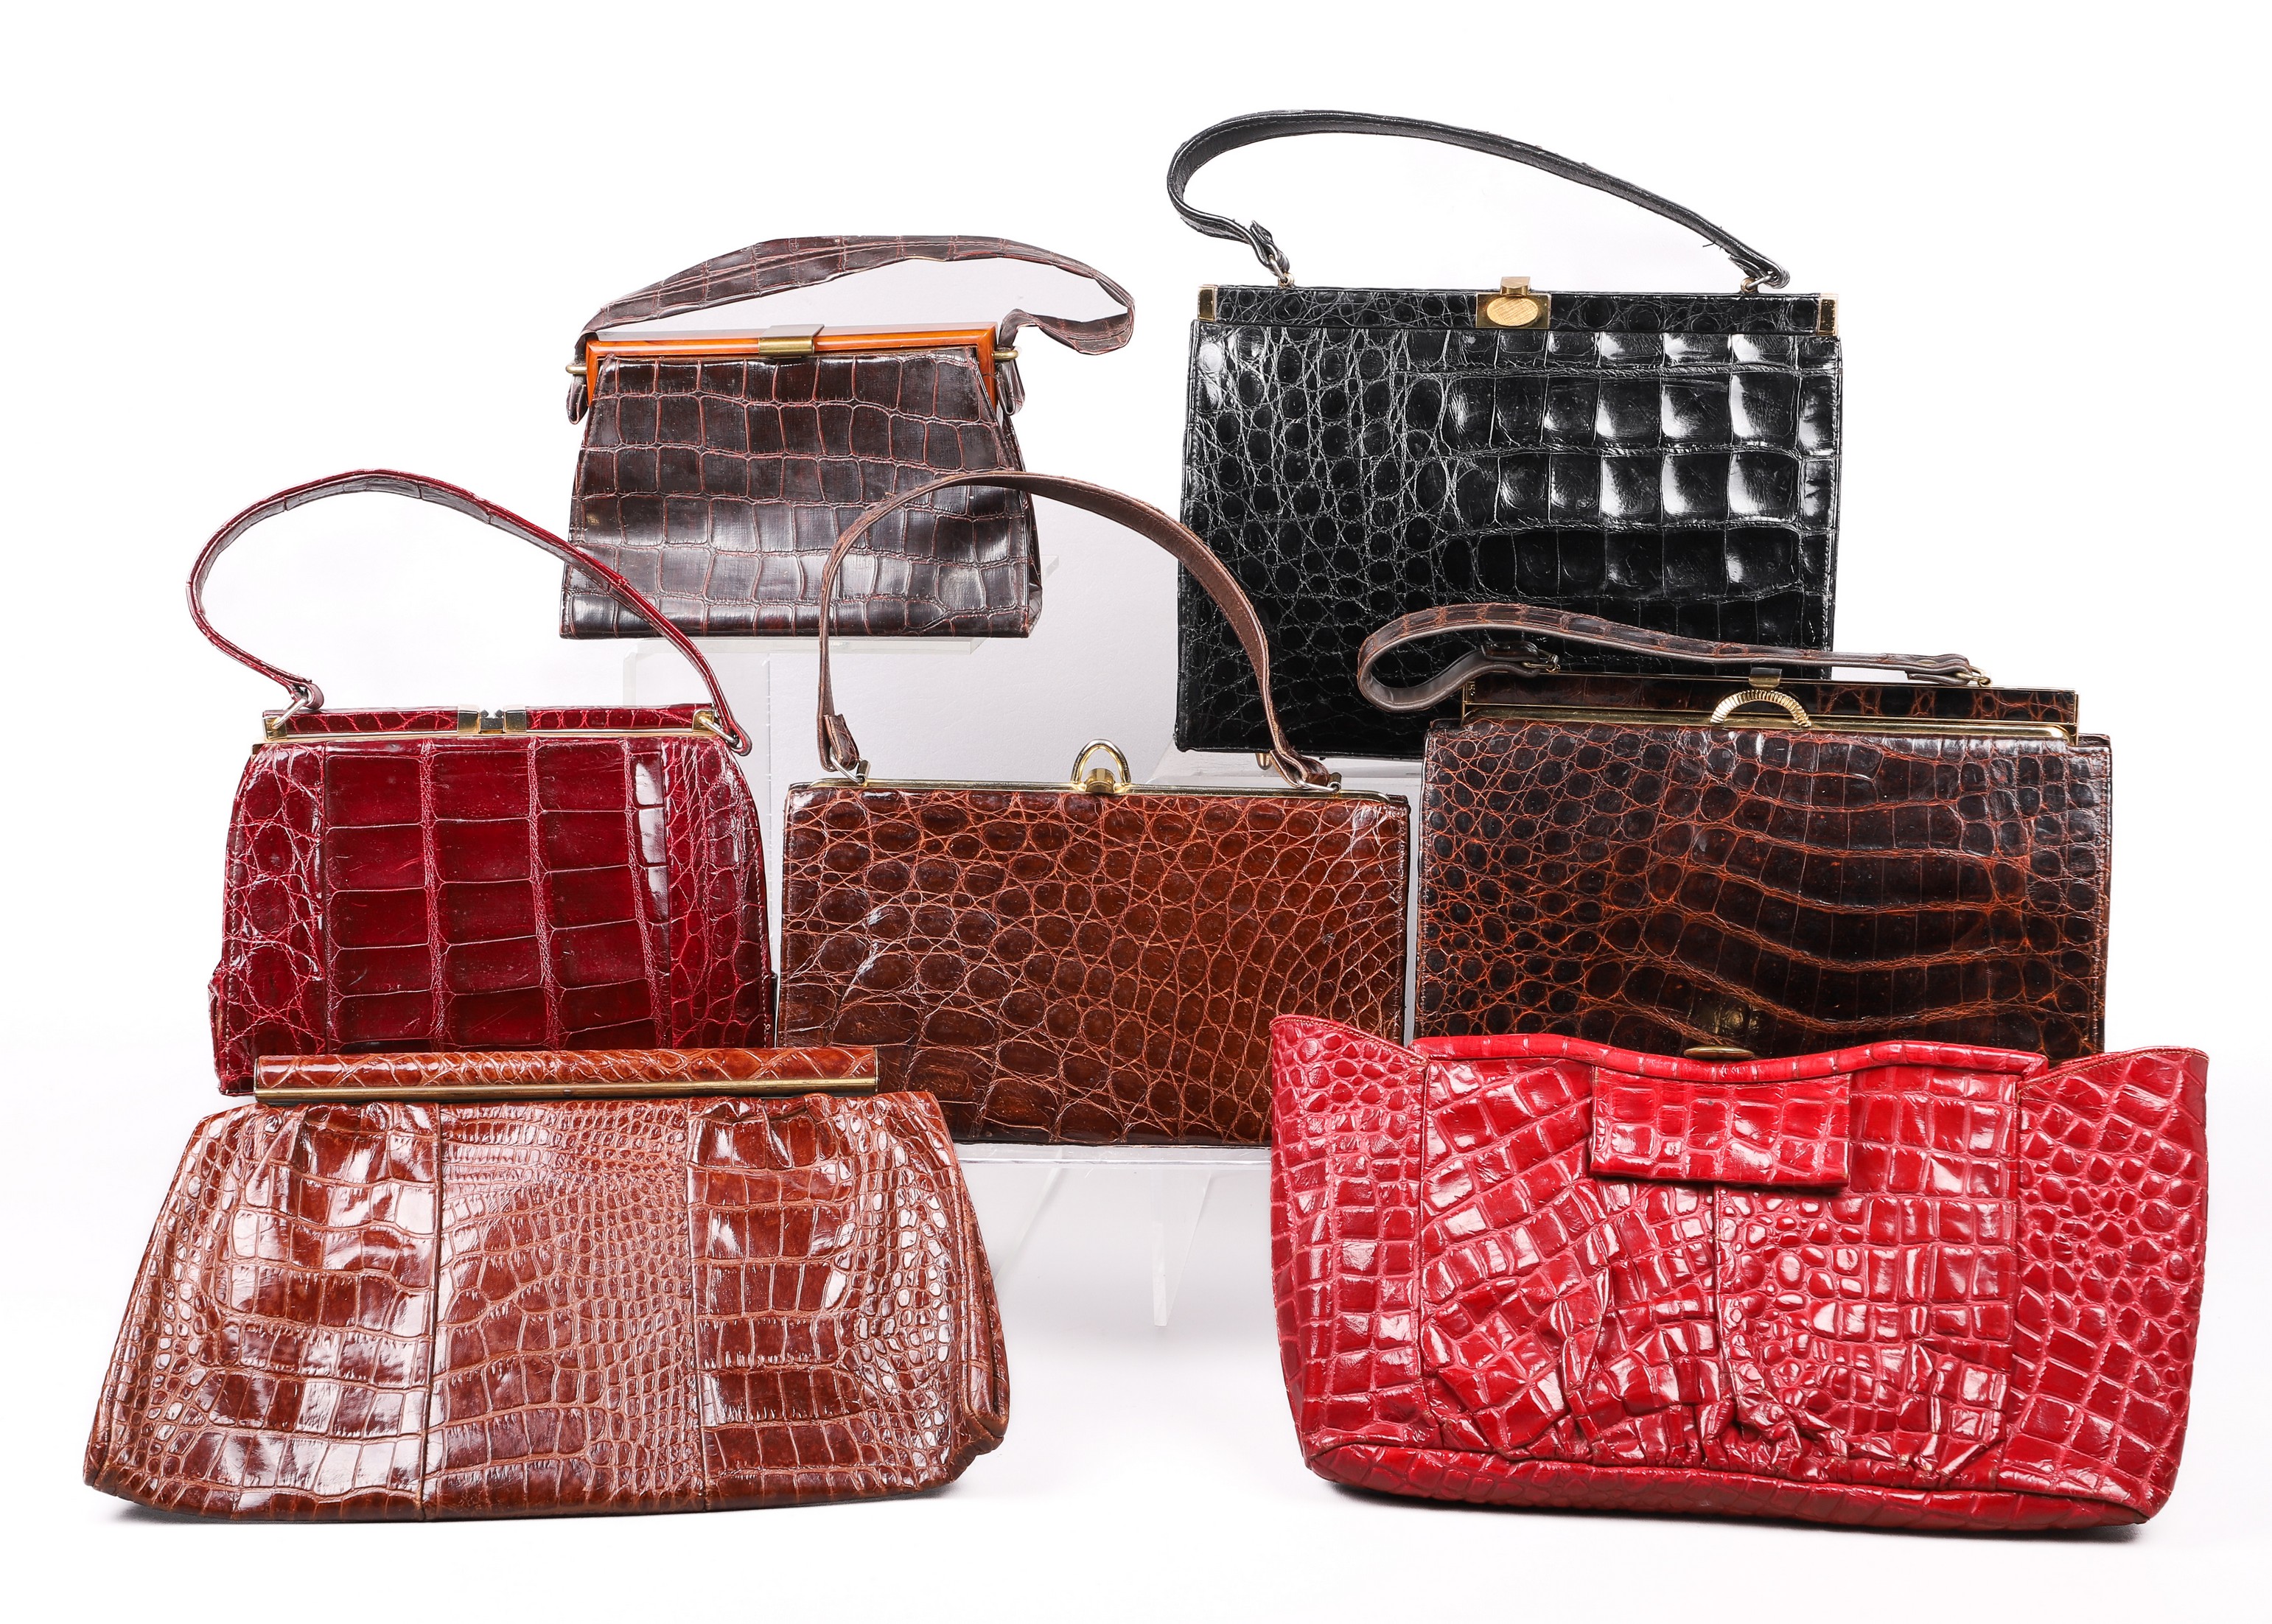 Reptile skin and style purse group